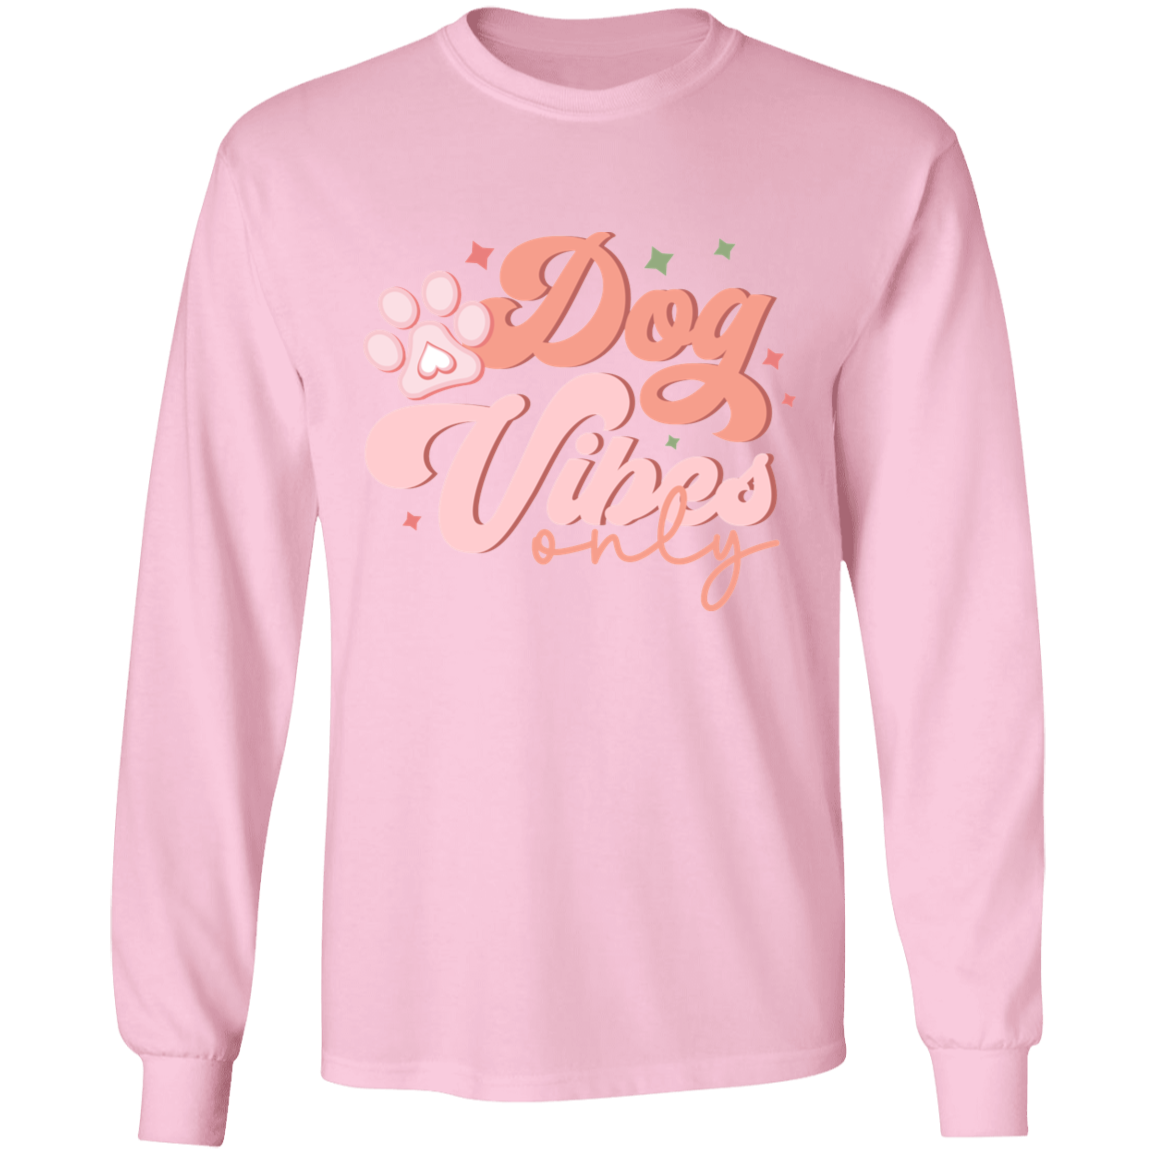 Dog Vibes Only  Long Sleeve T-Shirt